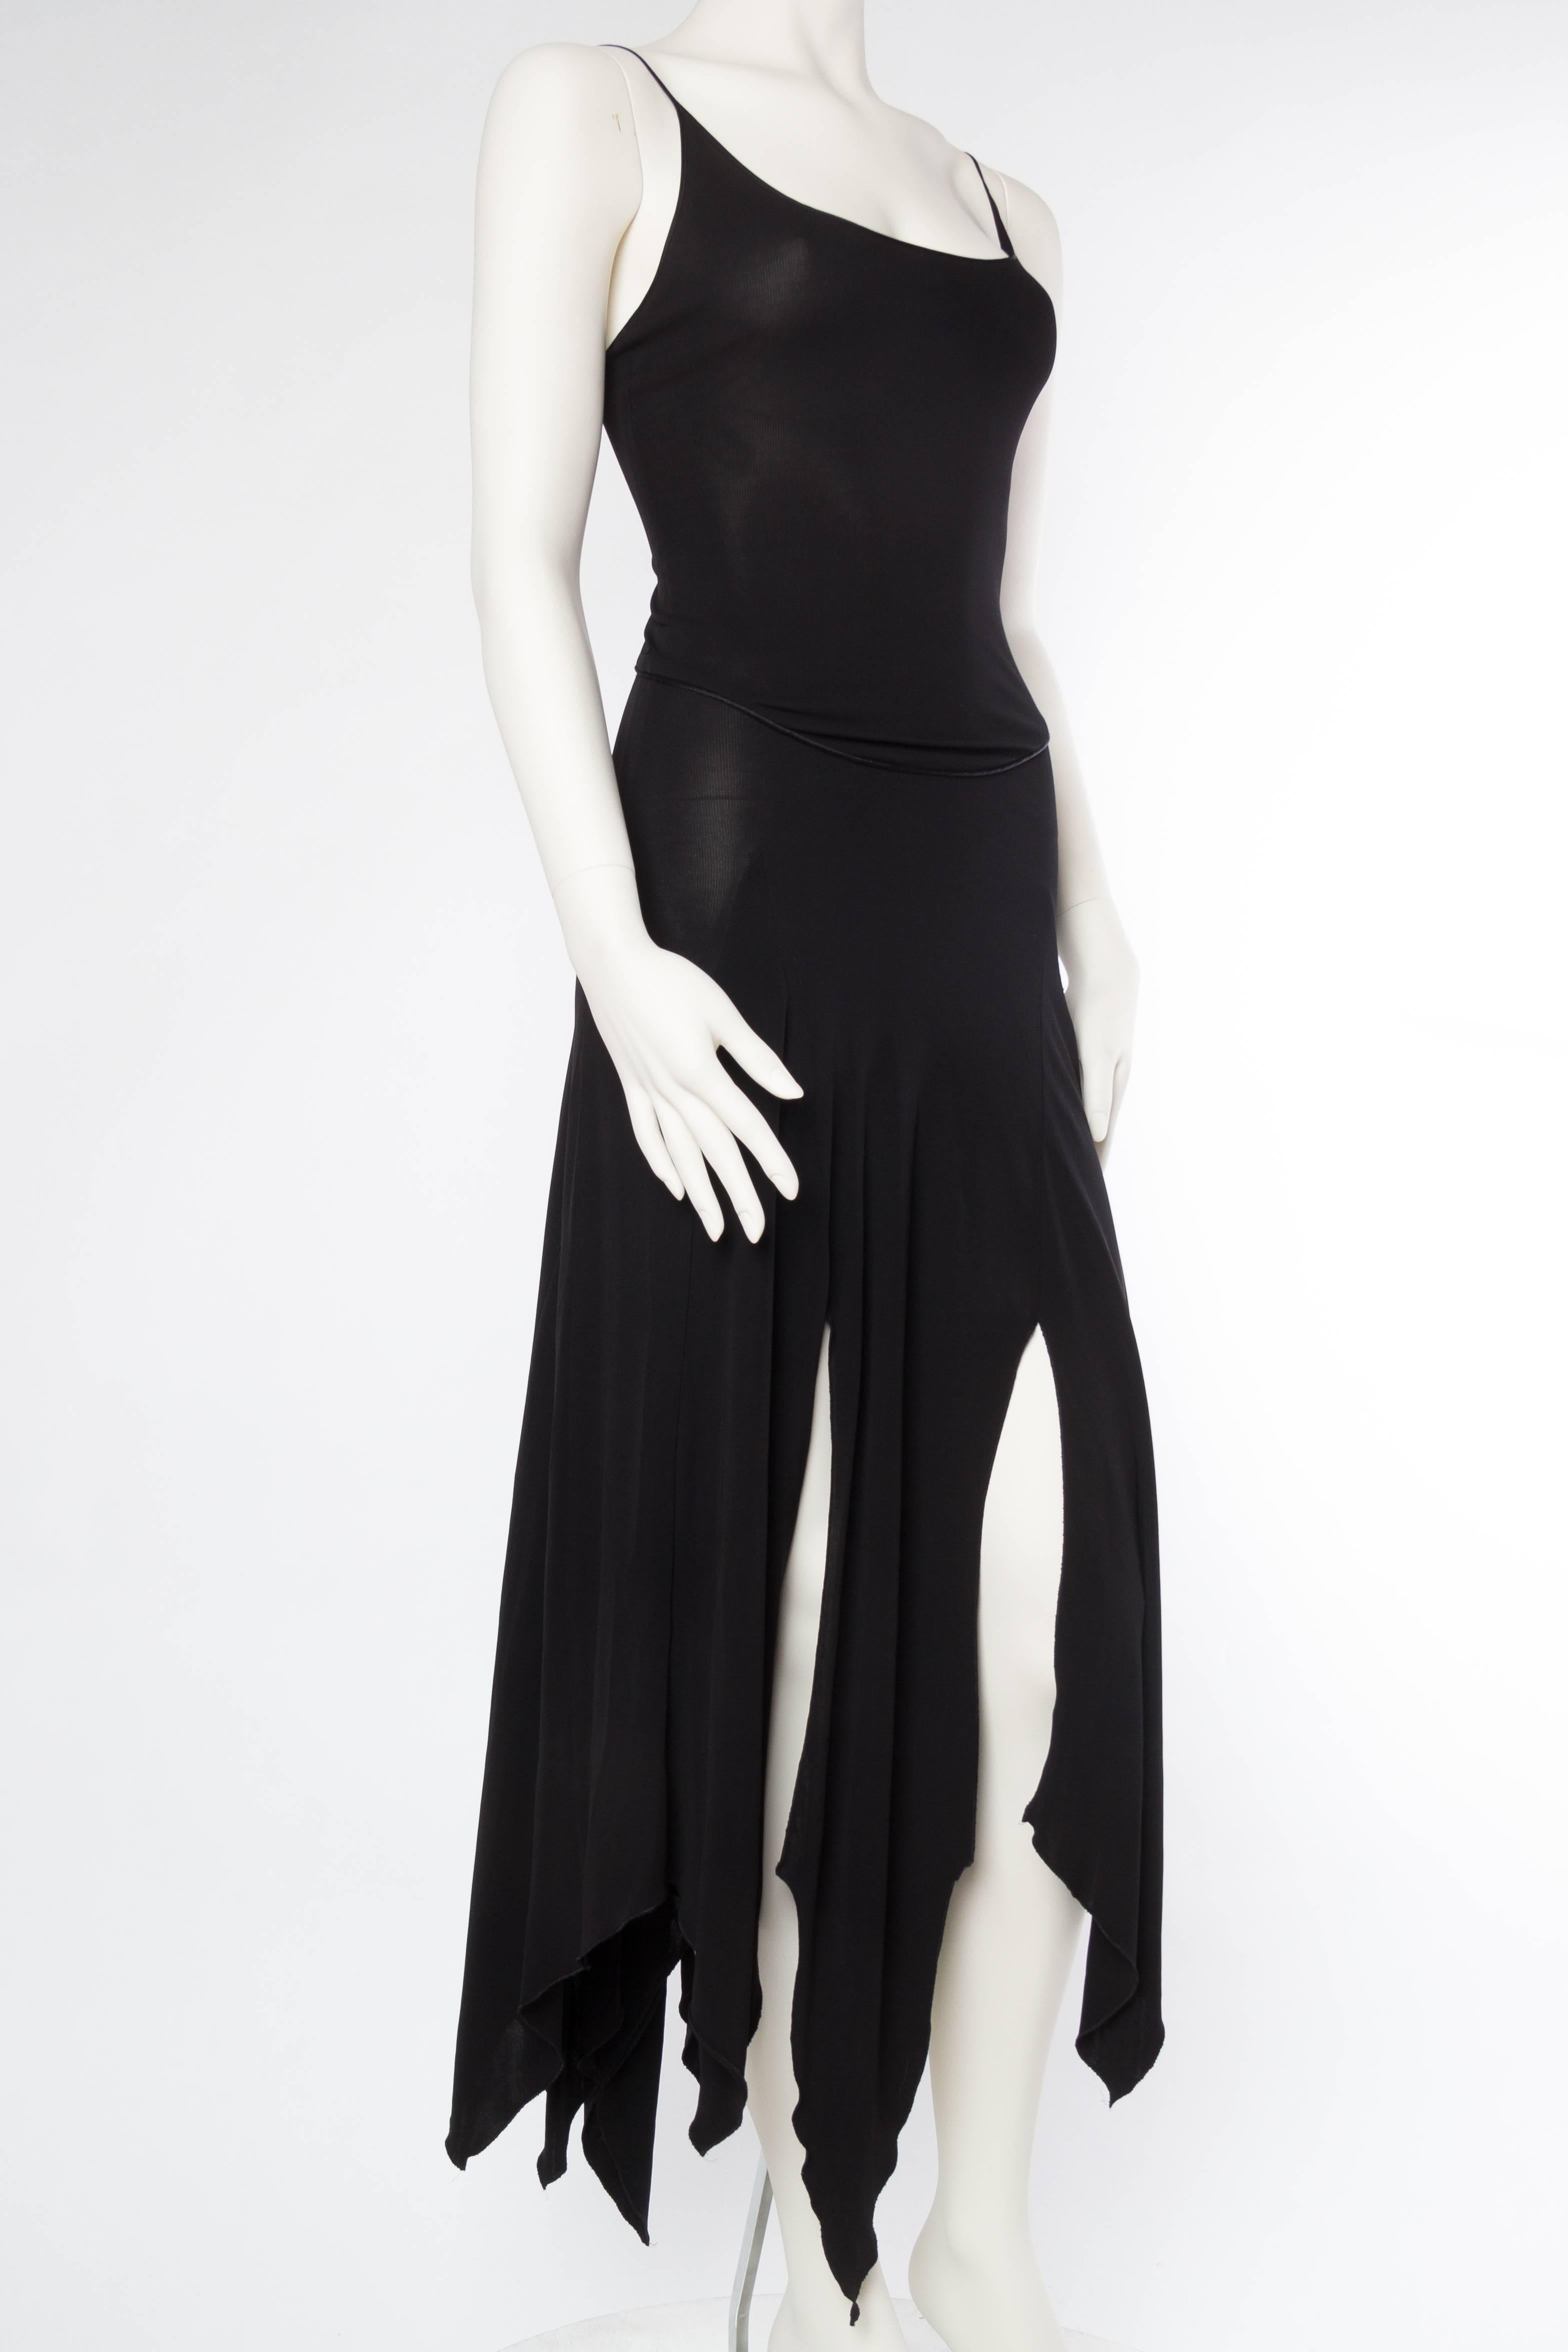 Black Givenchy Spandex Dancer Style Dress with High Slits